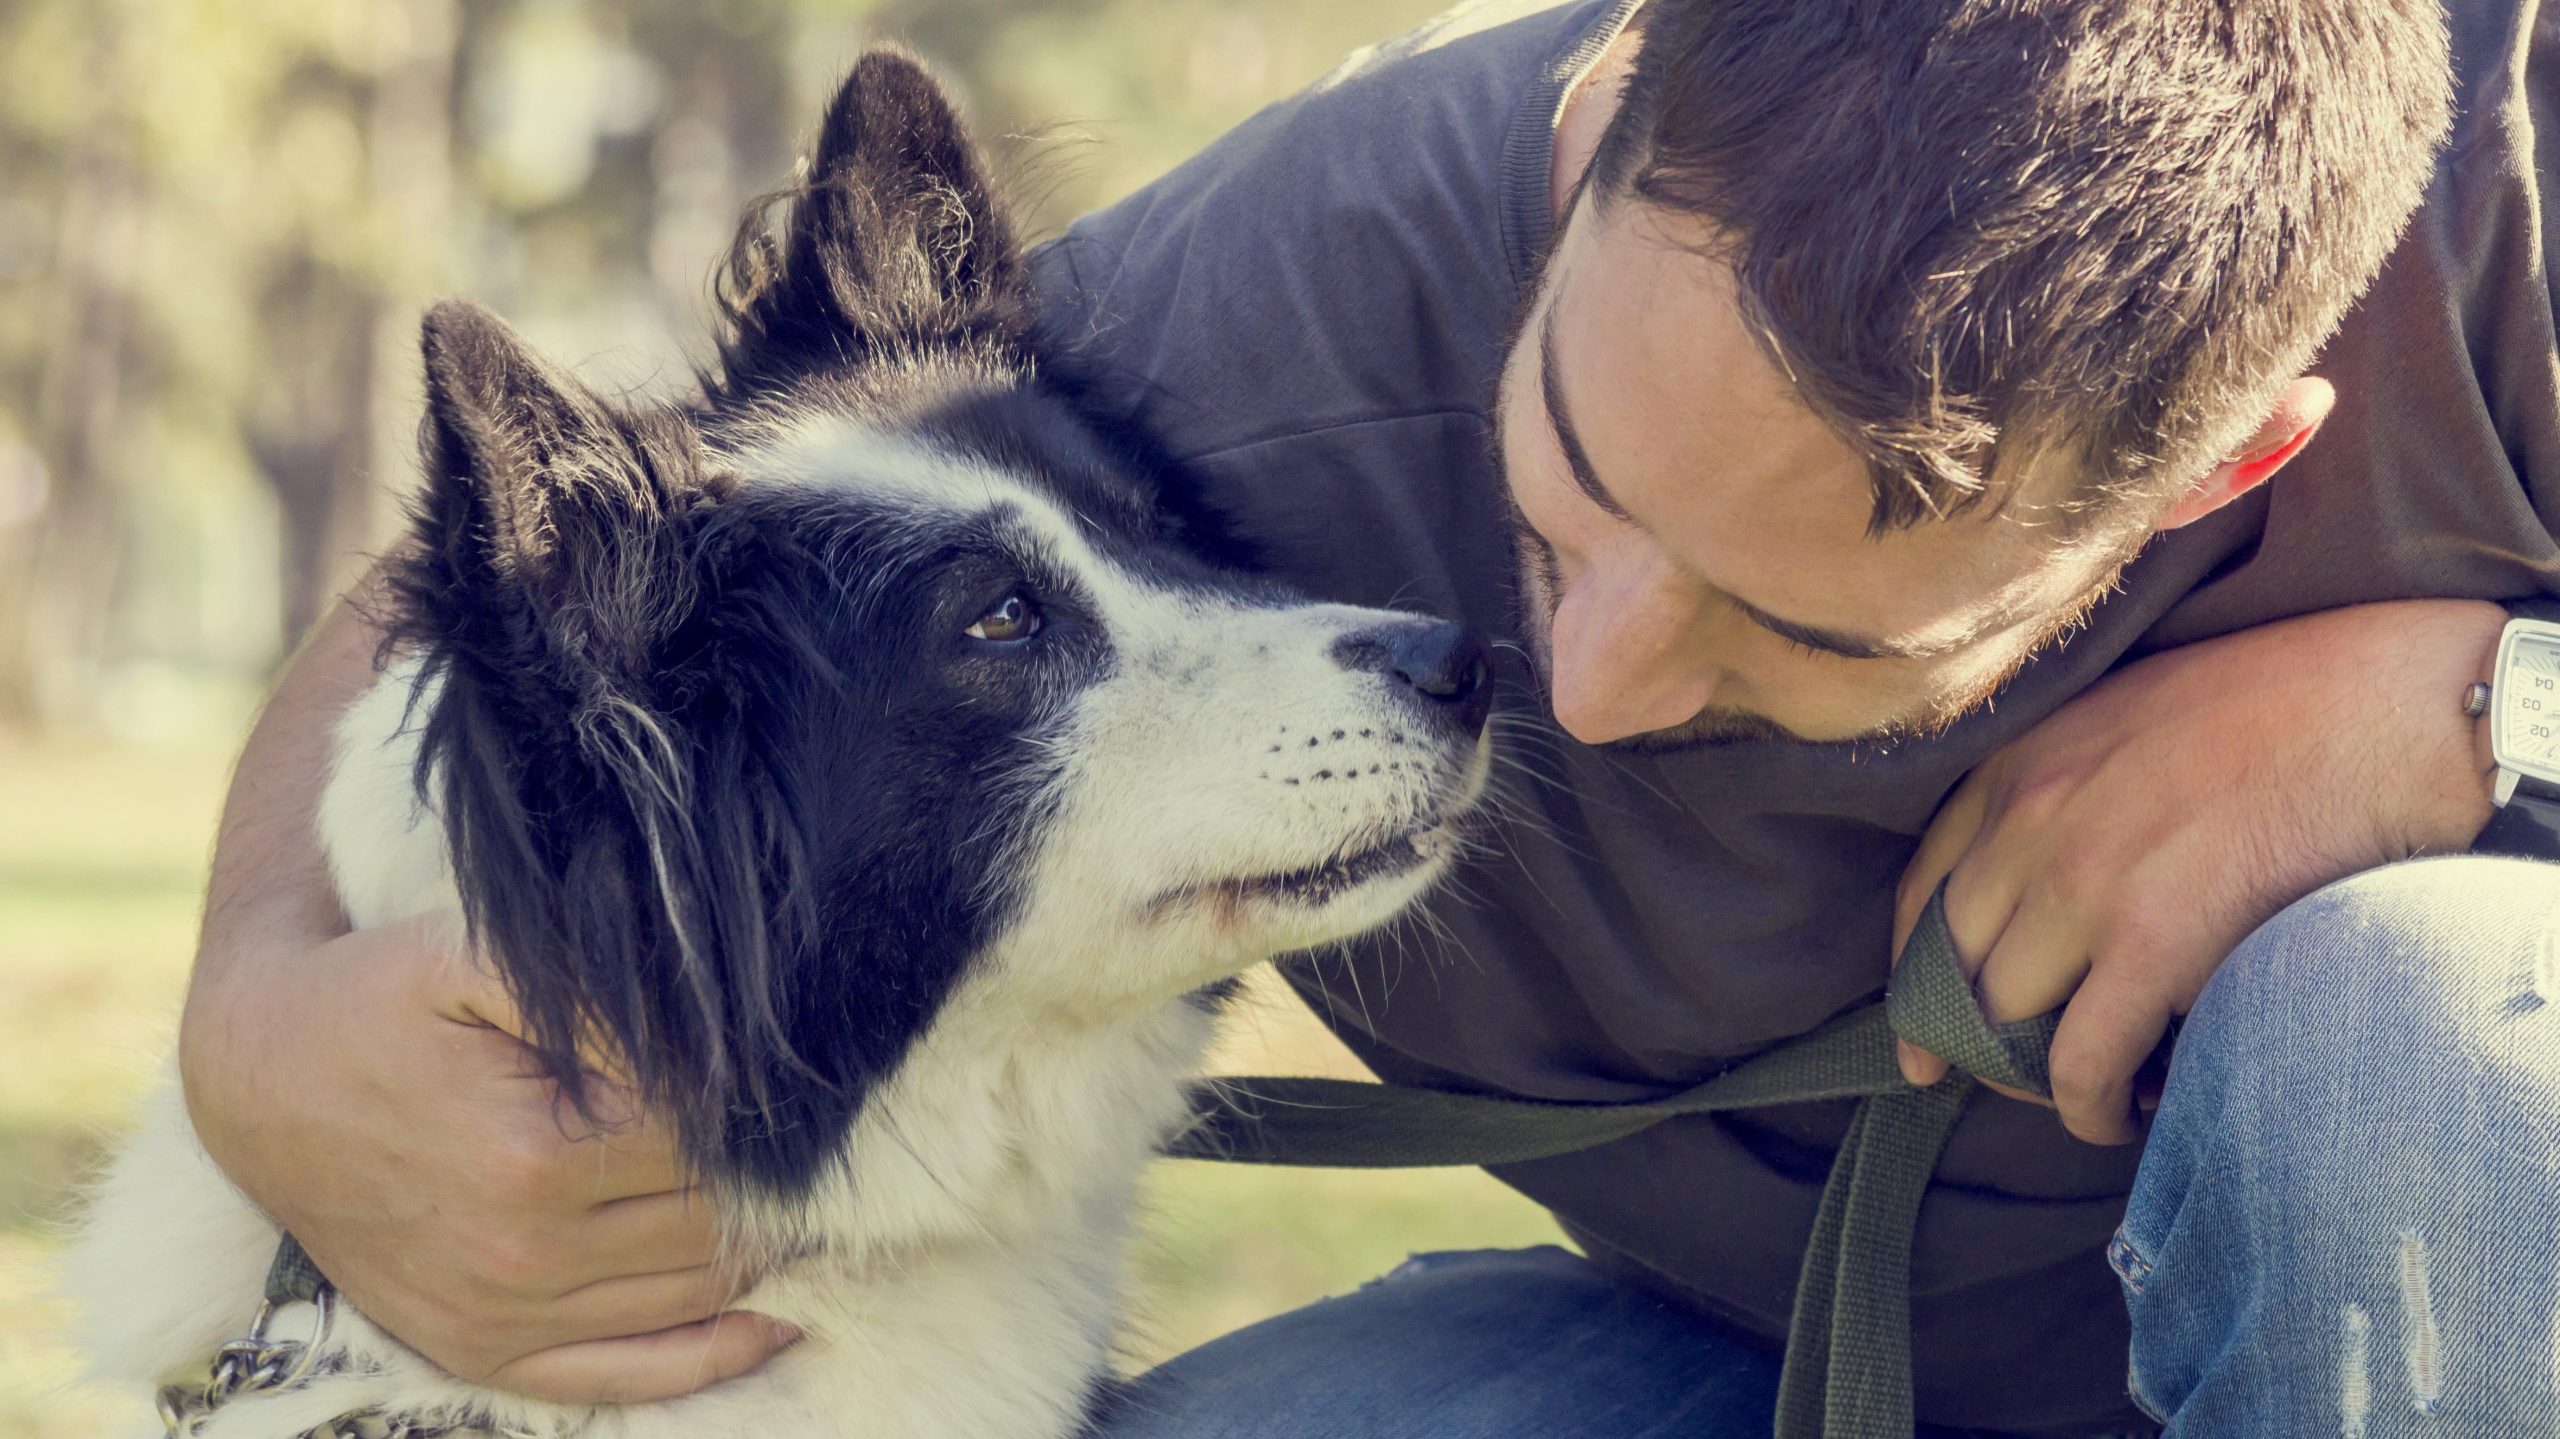 How You ‘Parent’ Your Dog Matters, Actually [Video]